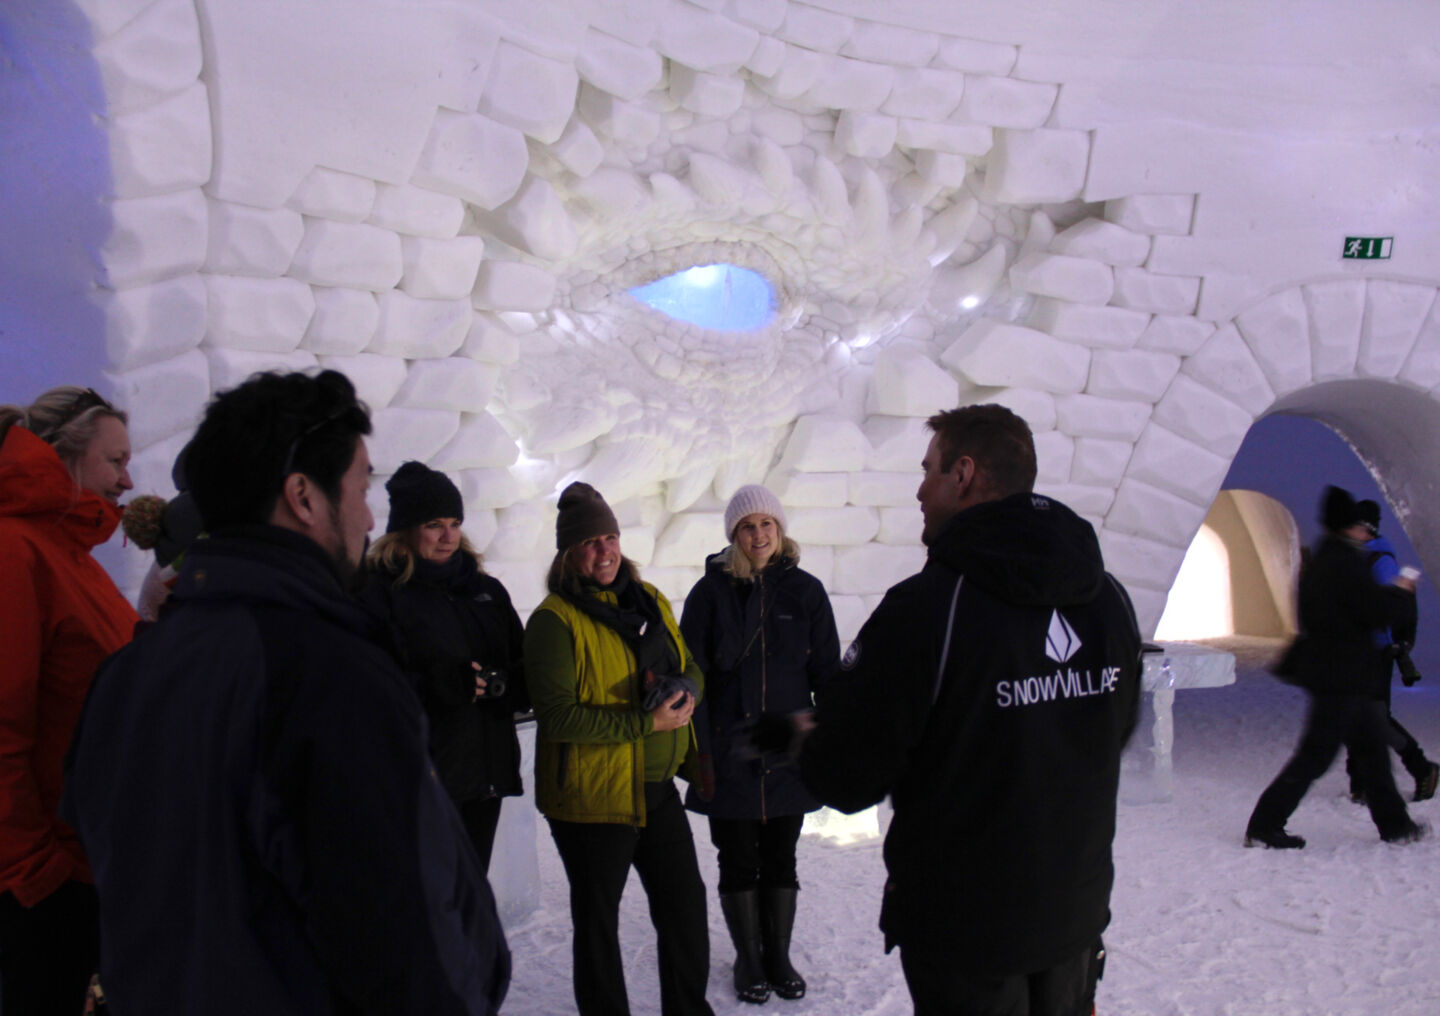 2018 FAM trip to the Game of Thrones inspired Lapland Hotels SnowVillage, a Finnish Lapland filming location